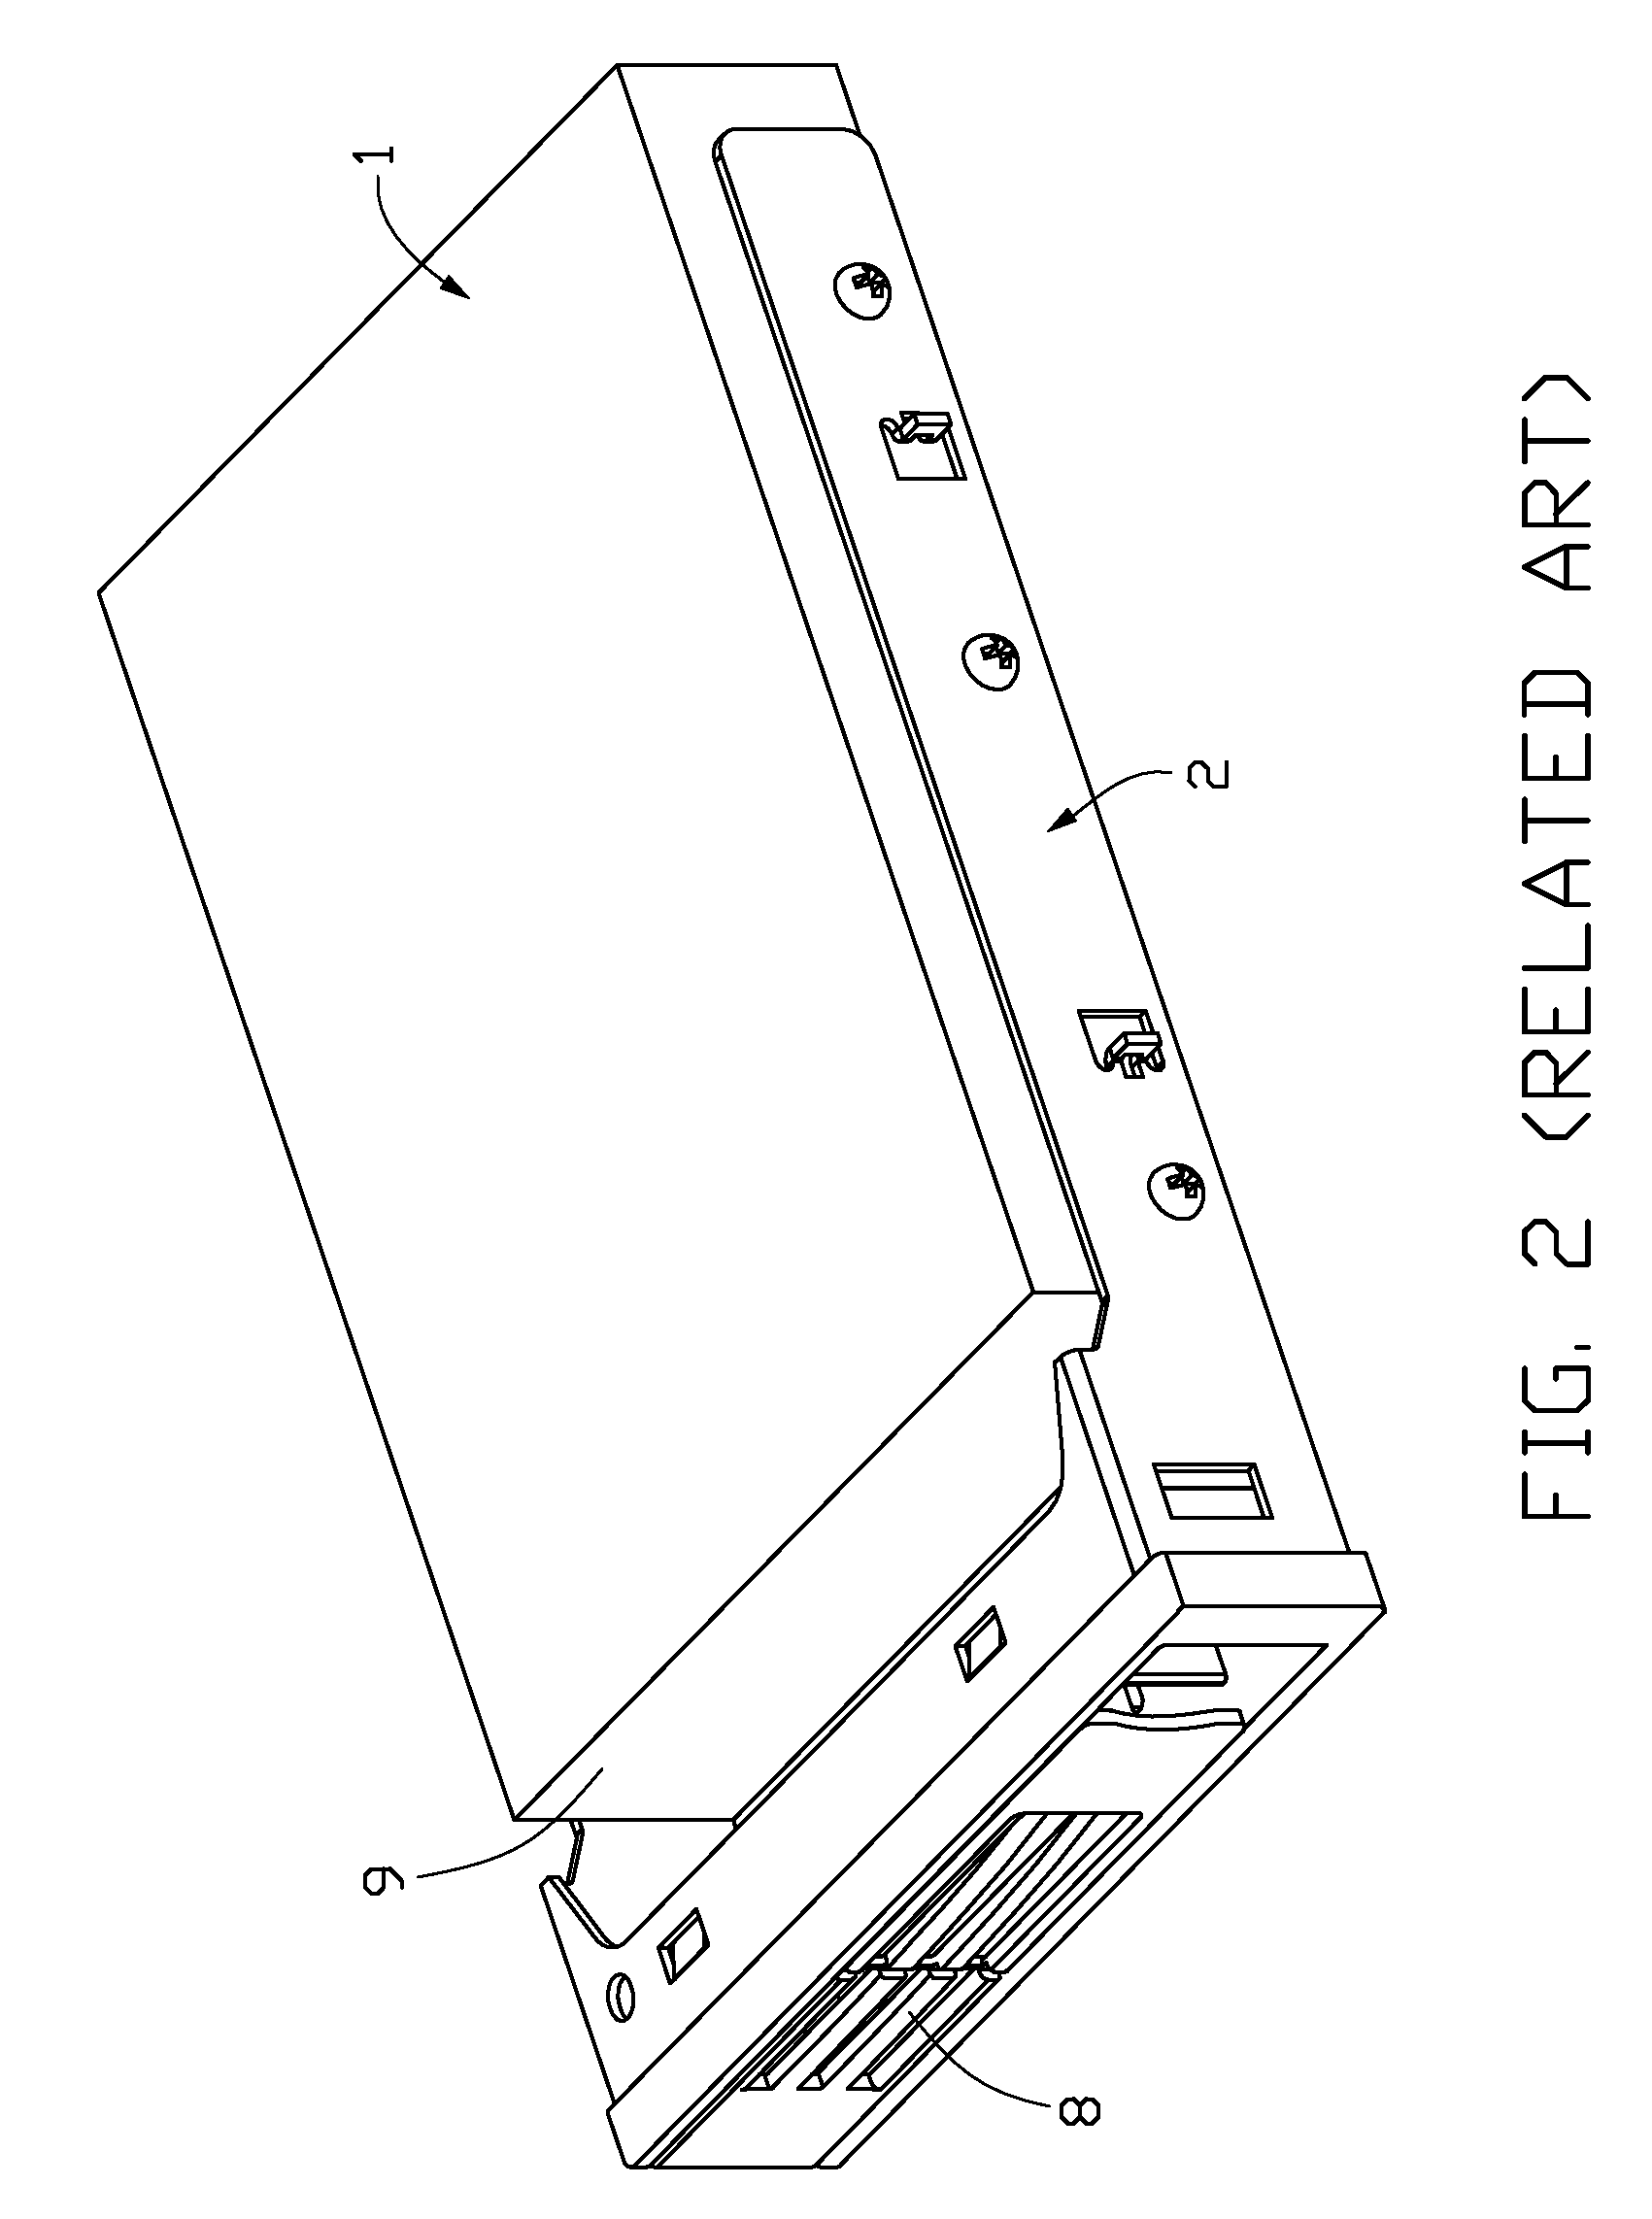 Frame for mounting data storage device